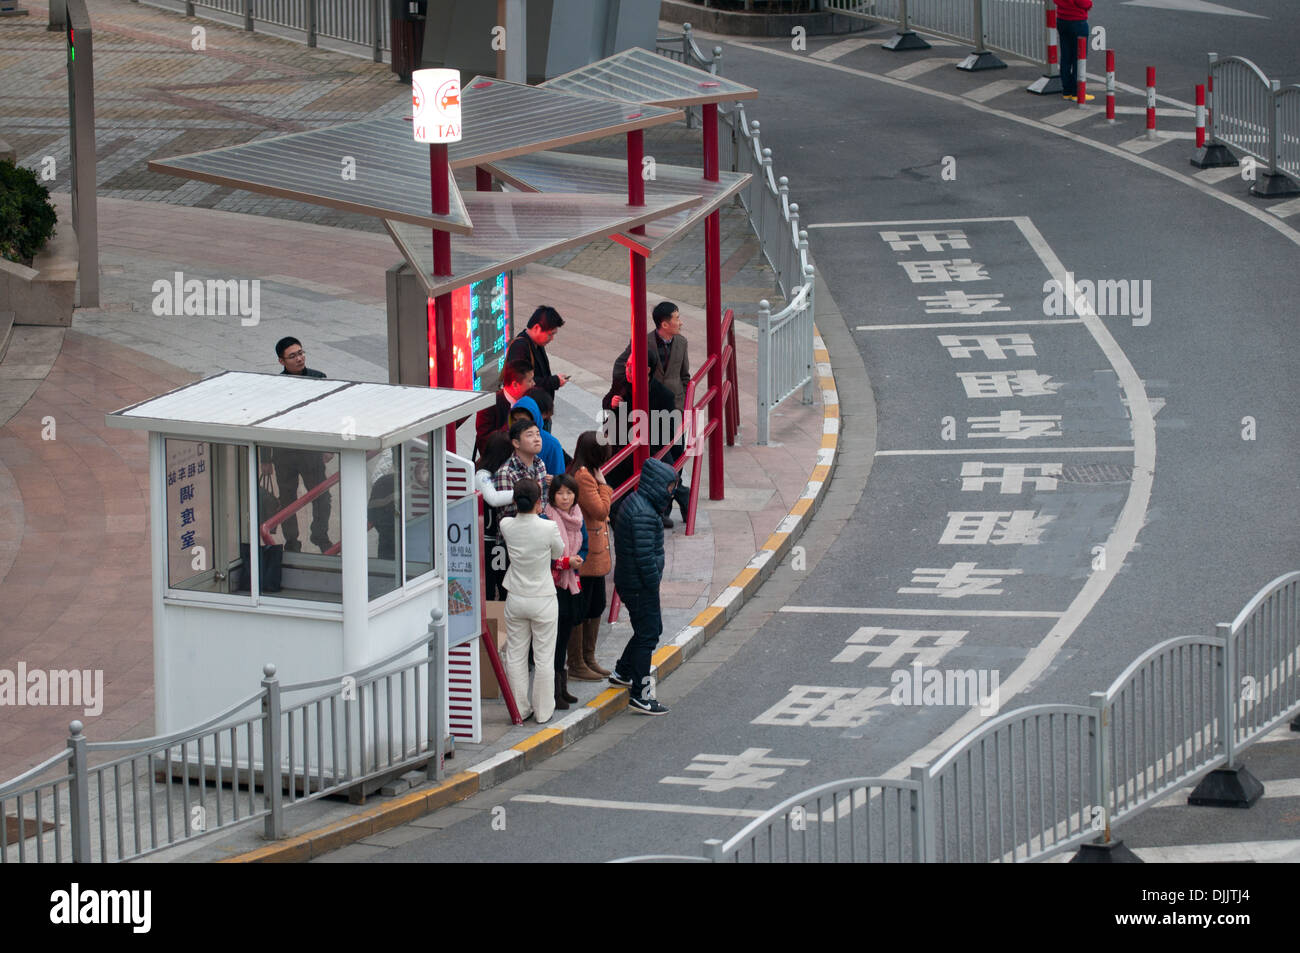 Bus stop in Pudong District, Shanghai, China Stock Photo